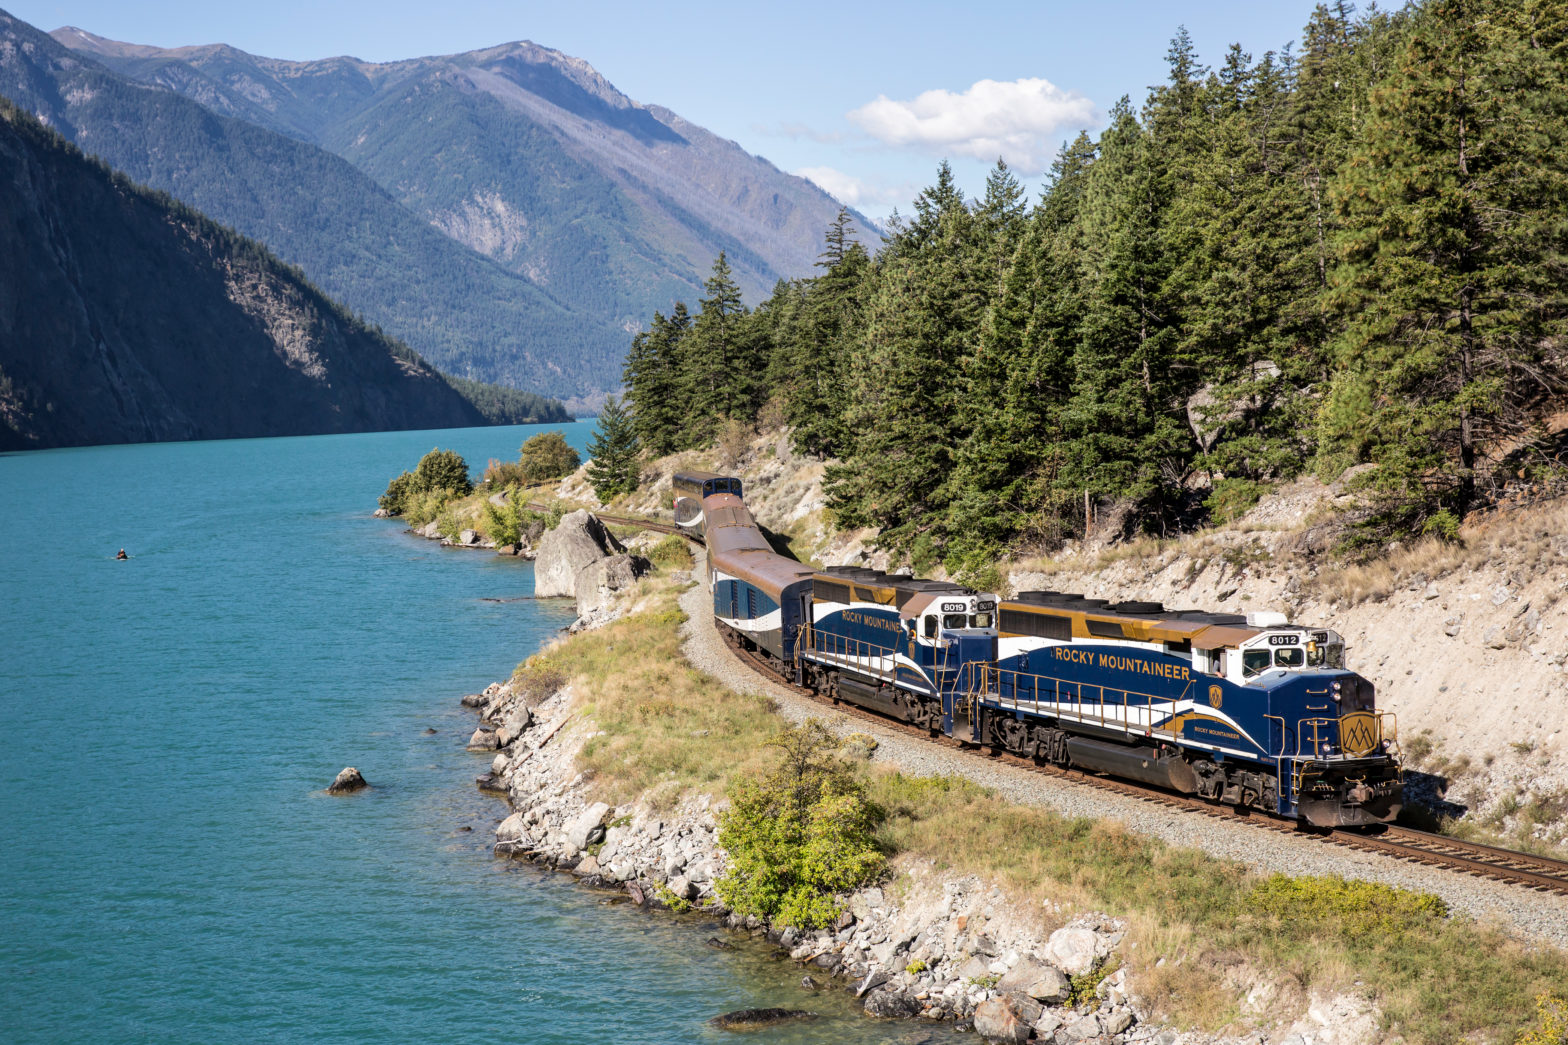 Rocky Mountaineer's New Luxury Train Routes Through The Southwest U.S. And Canada